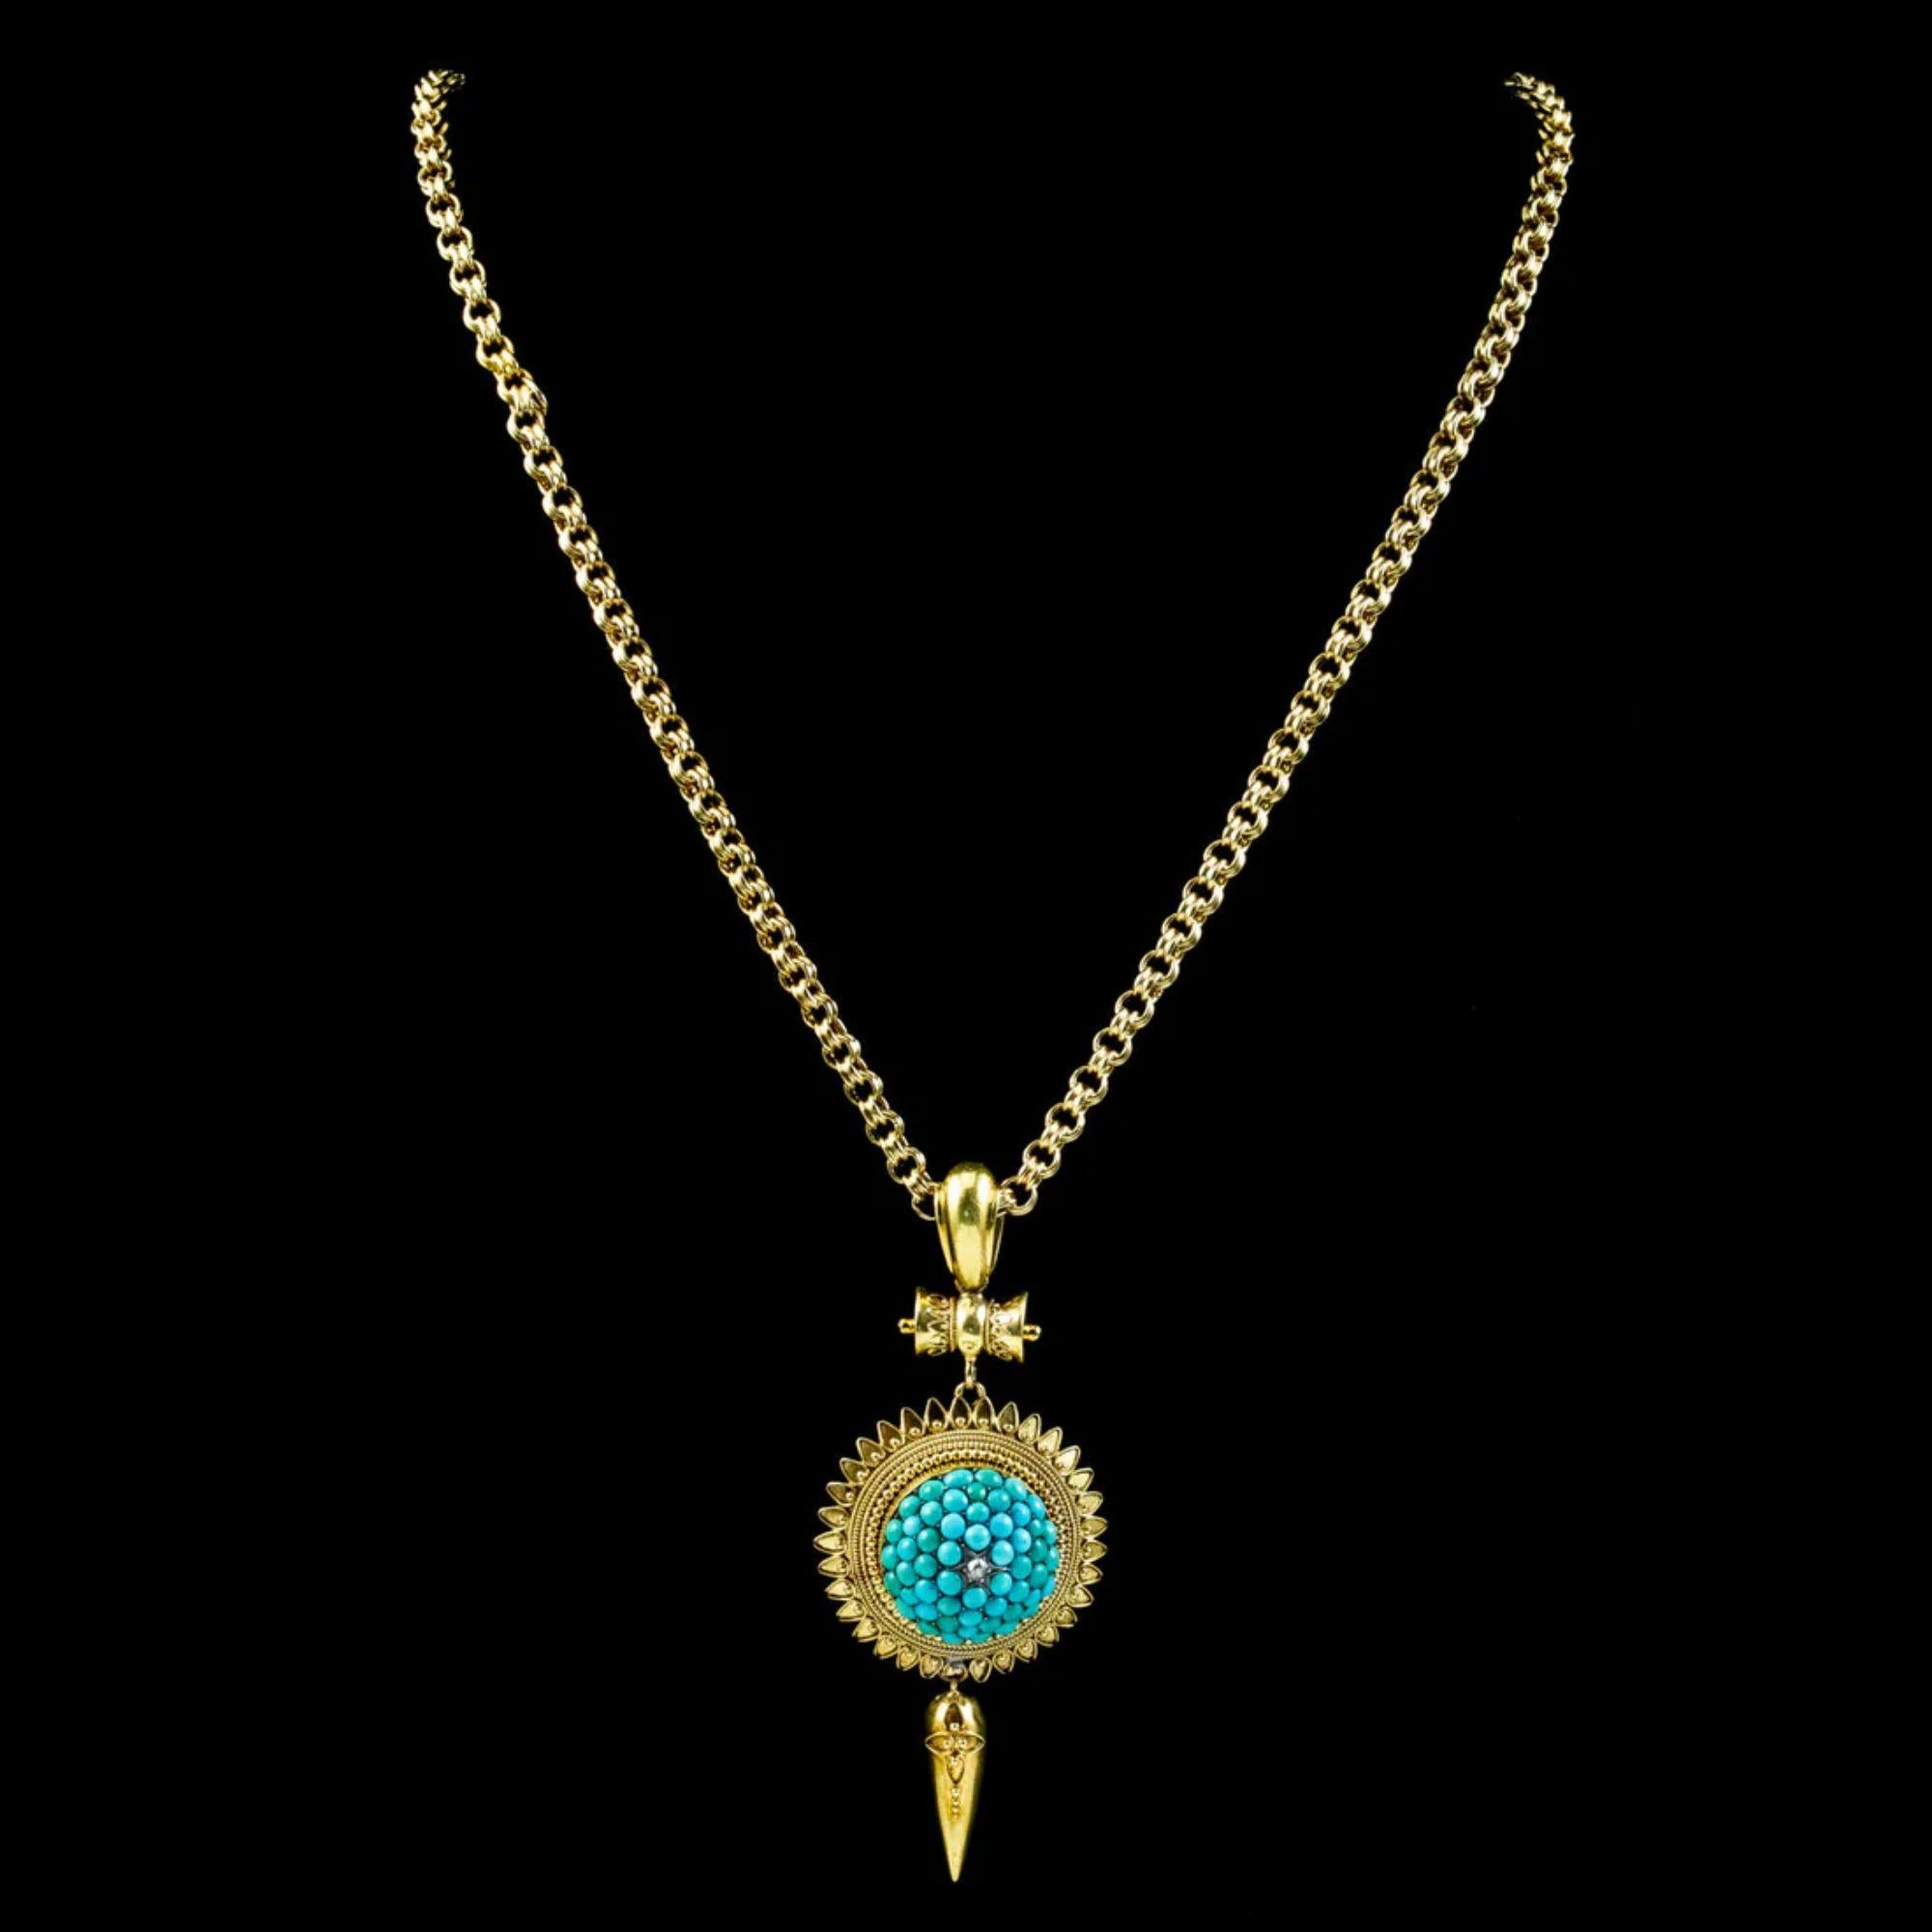 An exquisite antique Etruscan revival pendant from the mid-Victorian era (Circa 1860) depicting an ornate sun with an icicle dropper below. A turquoise encrusted dome also bulges out of the centre and is crowned with a twinkling old mine cut diamond